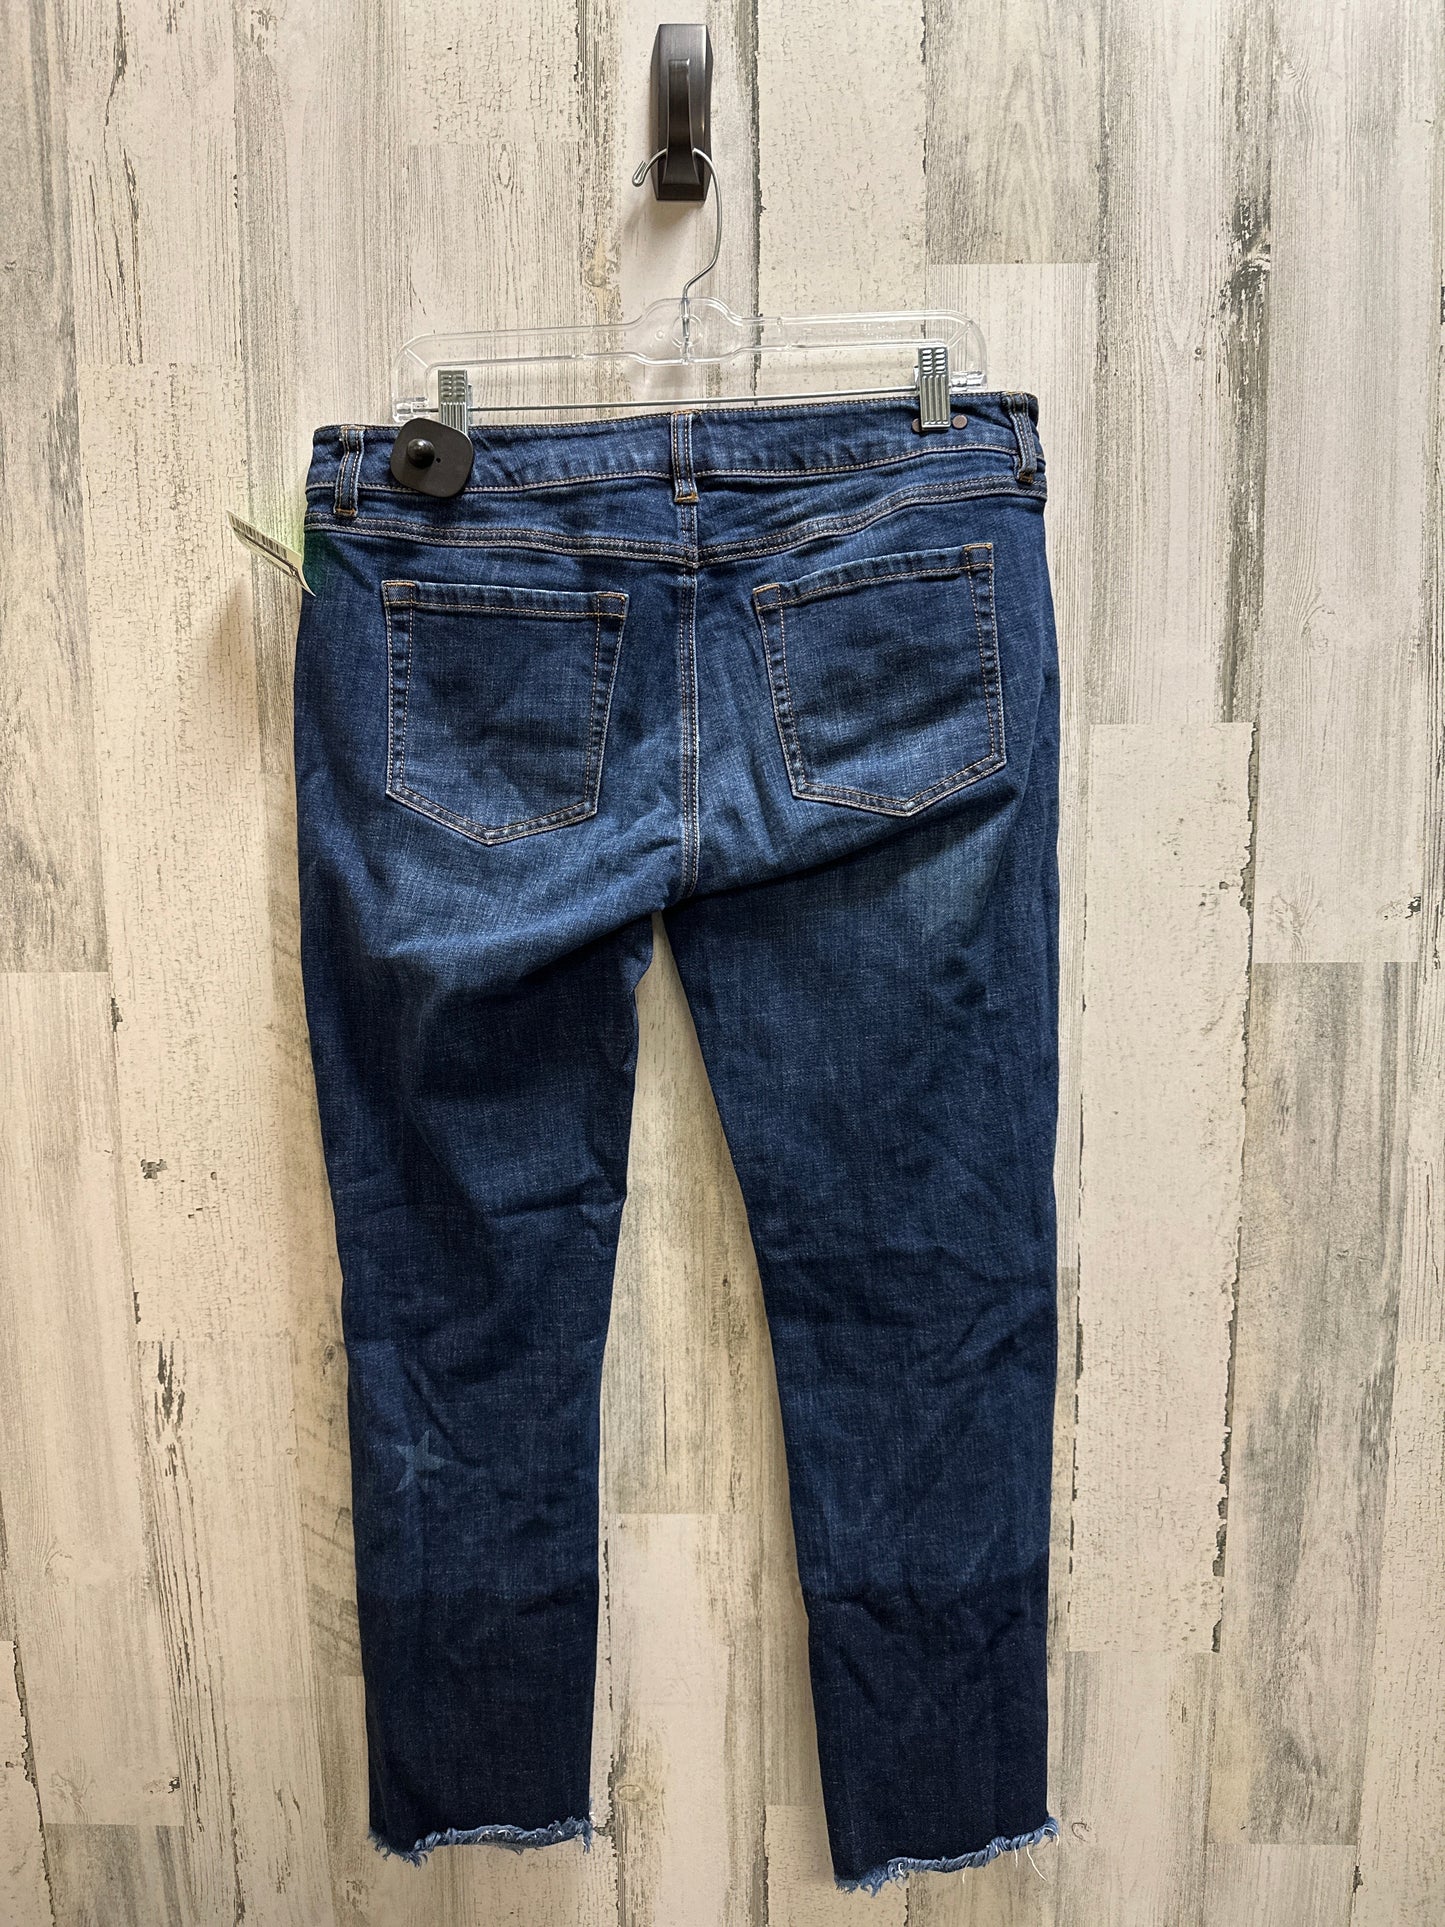 Jeans Boot Cut By Cabi  Size: 8